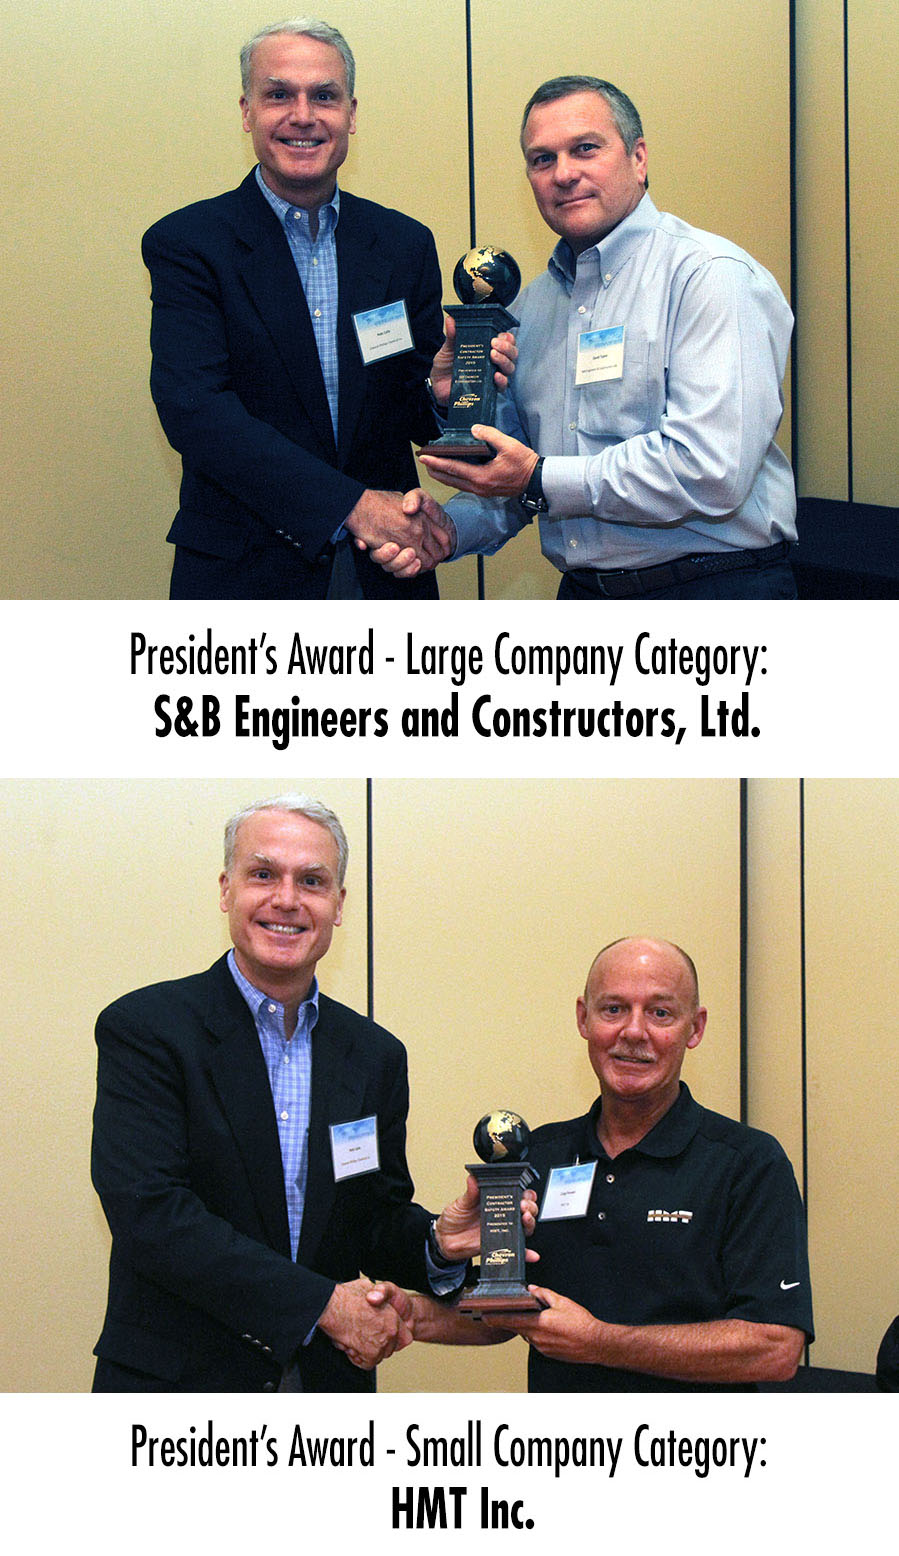  Chevron Phillips Chemical Presents its 2015 President’s Contractor Safety and Contractor Safety Excellence Awards